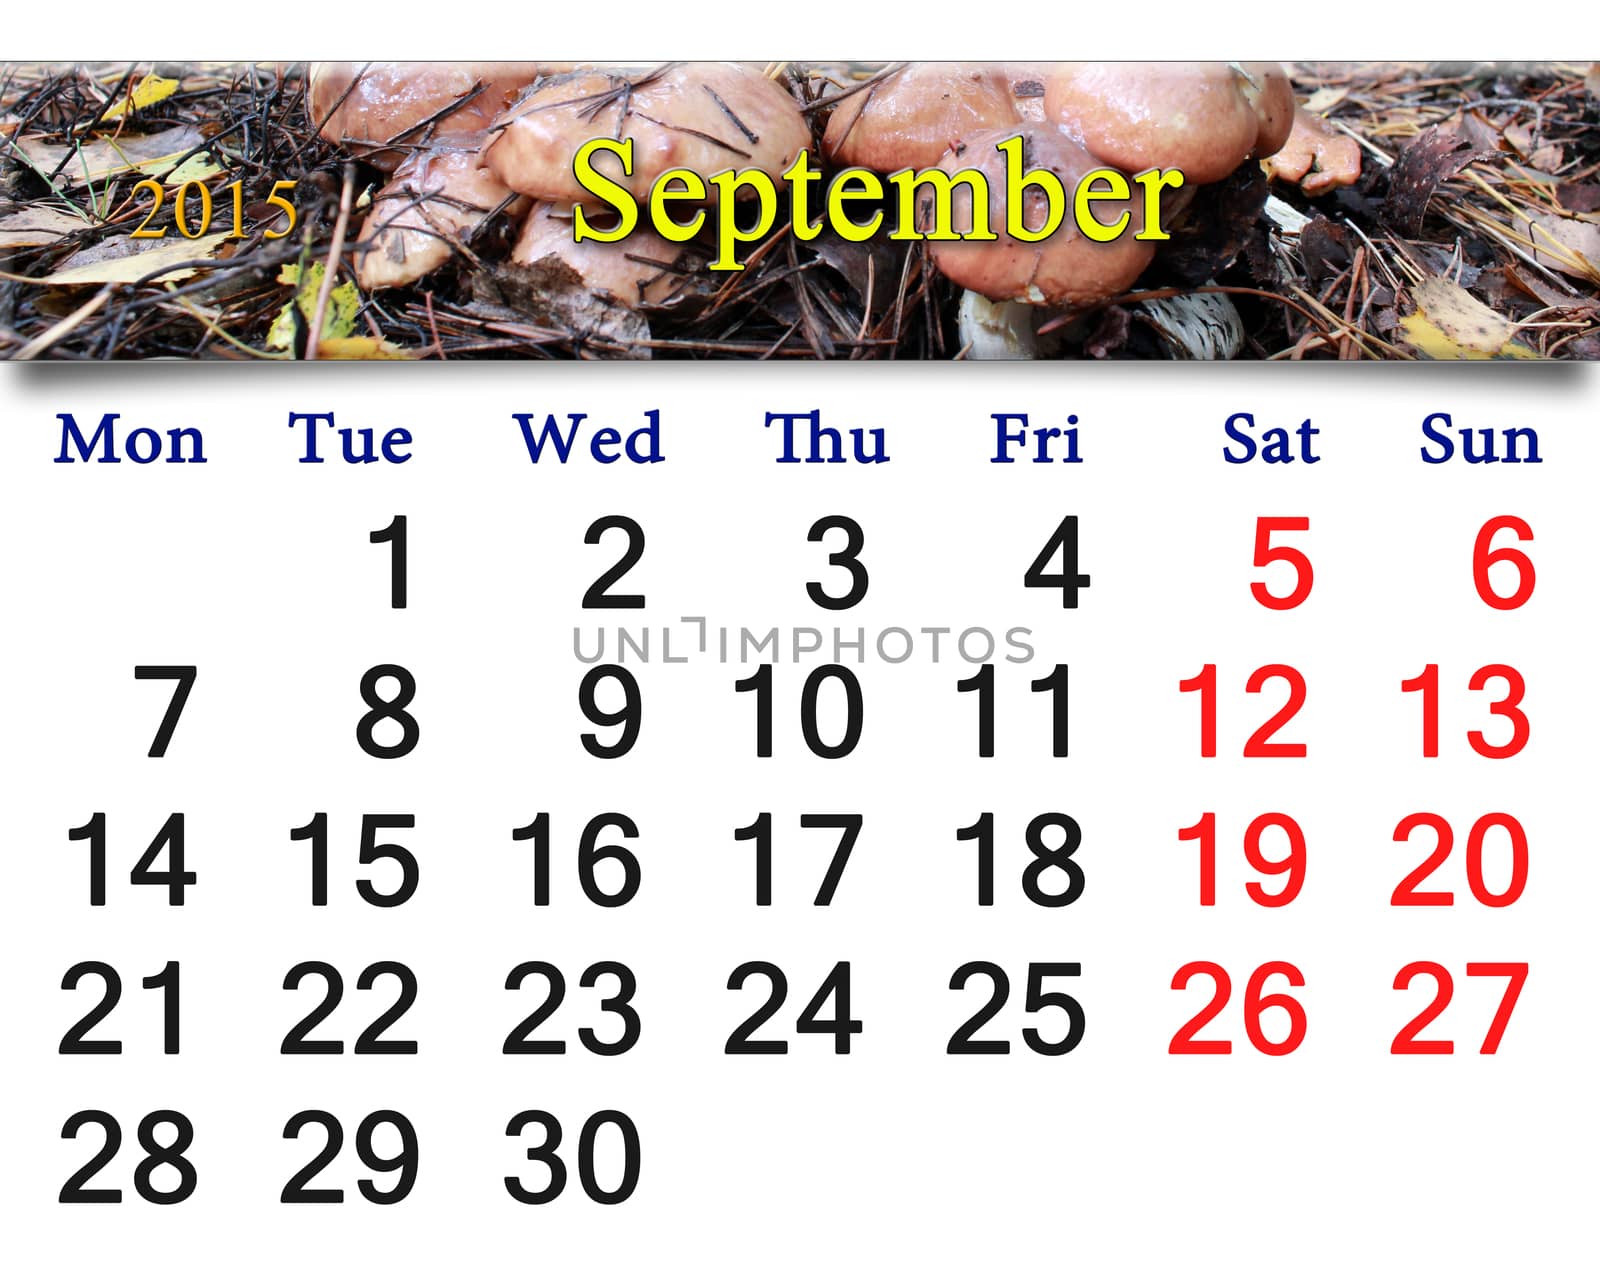 calendar for September of 2015 with mushrooms by alexmak